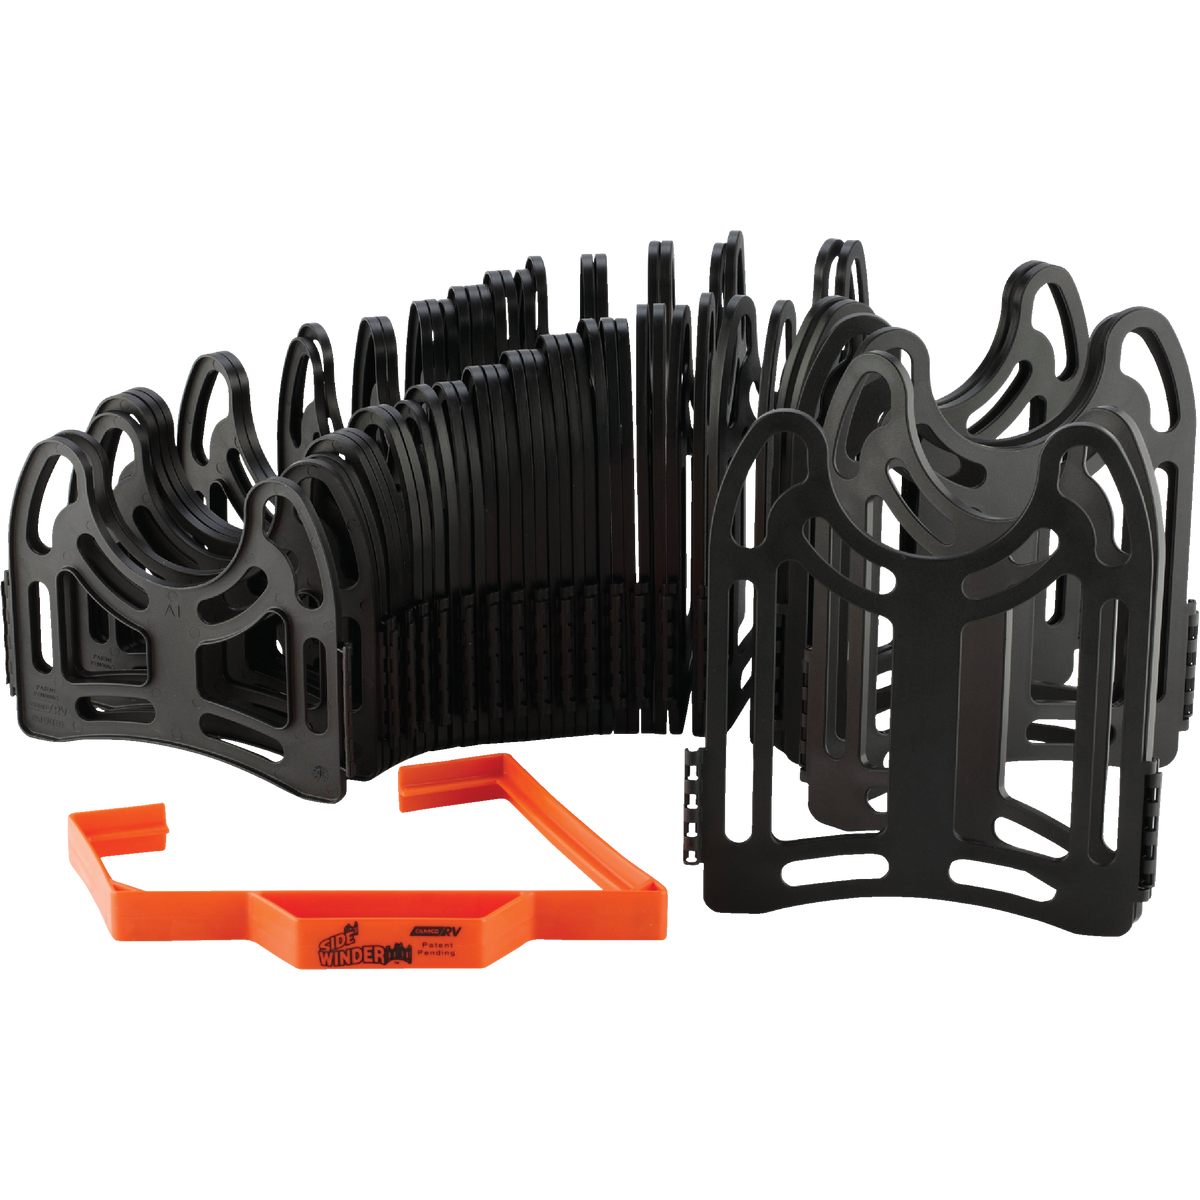 RV Sewer Hose Support